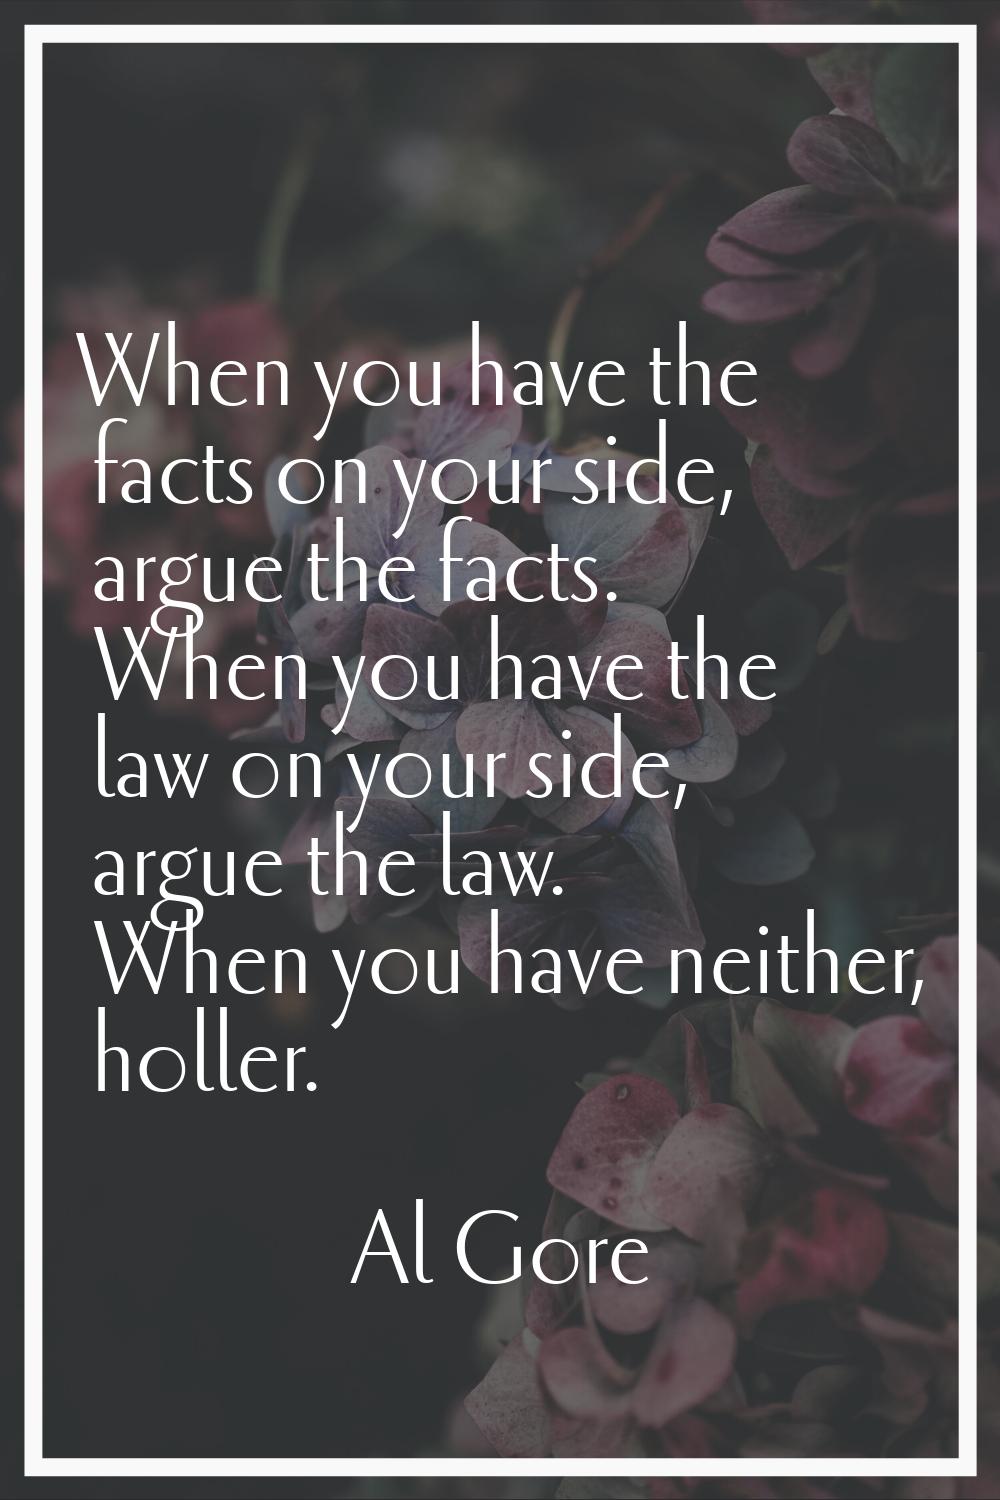 When you have the facts on your side, argue the facts. When you have the law on your side, argue th